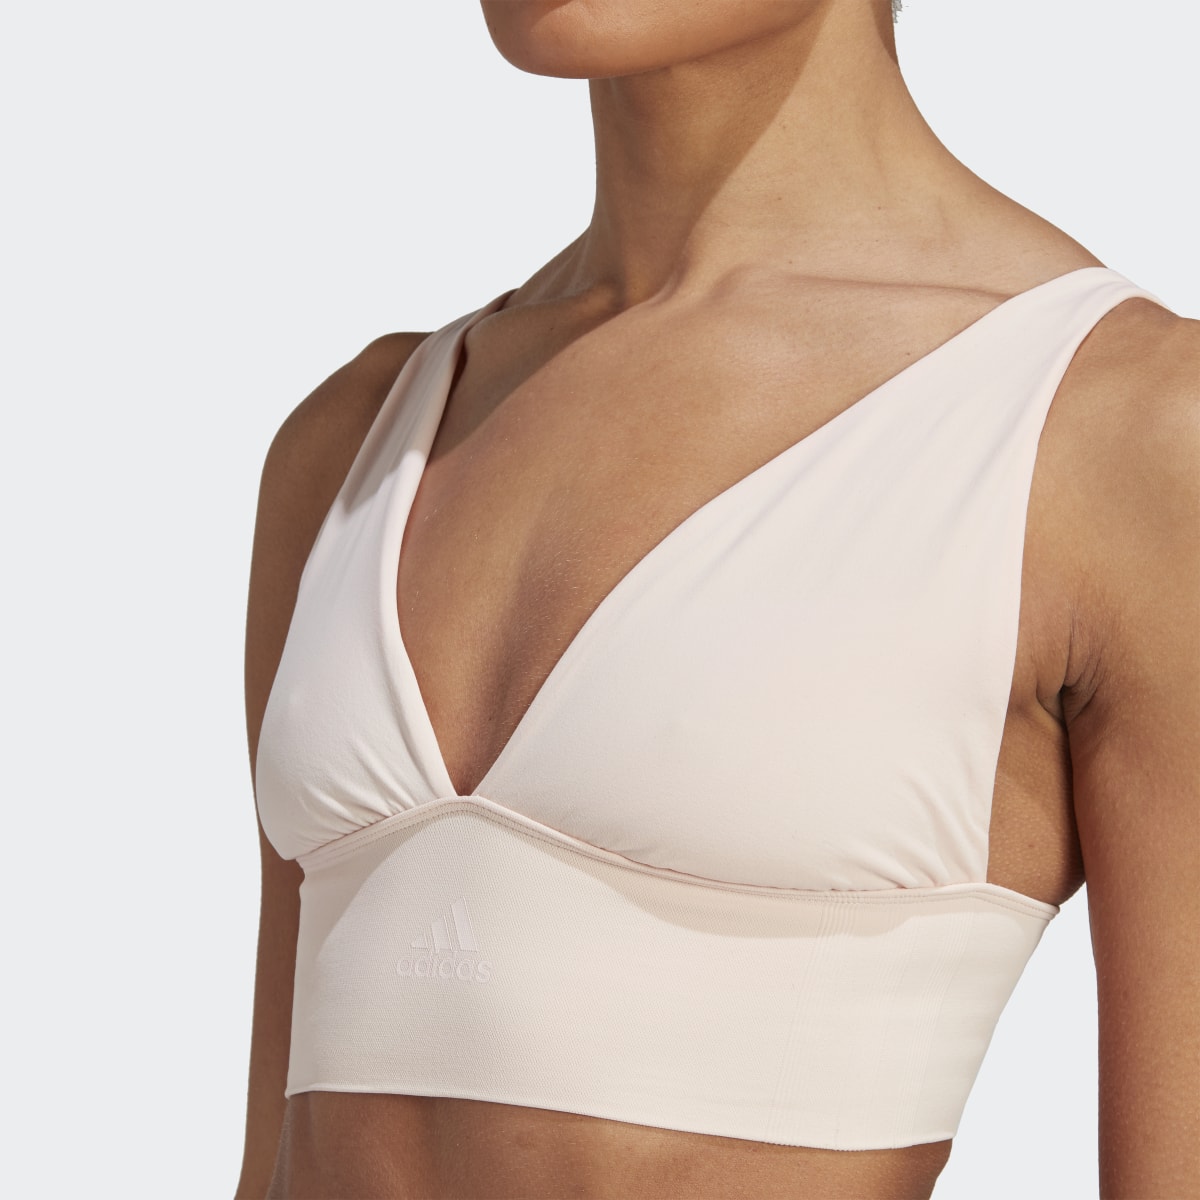 Adidas Active Seamless Micro Stretch Long Line Plunge Lounge Bra. 7